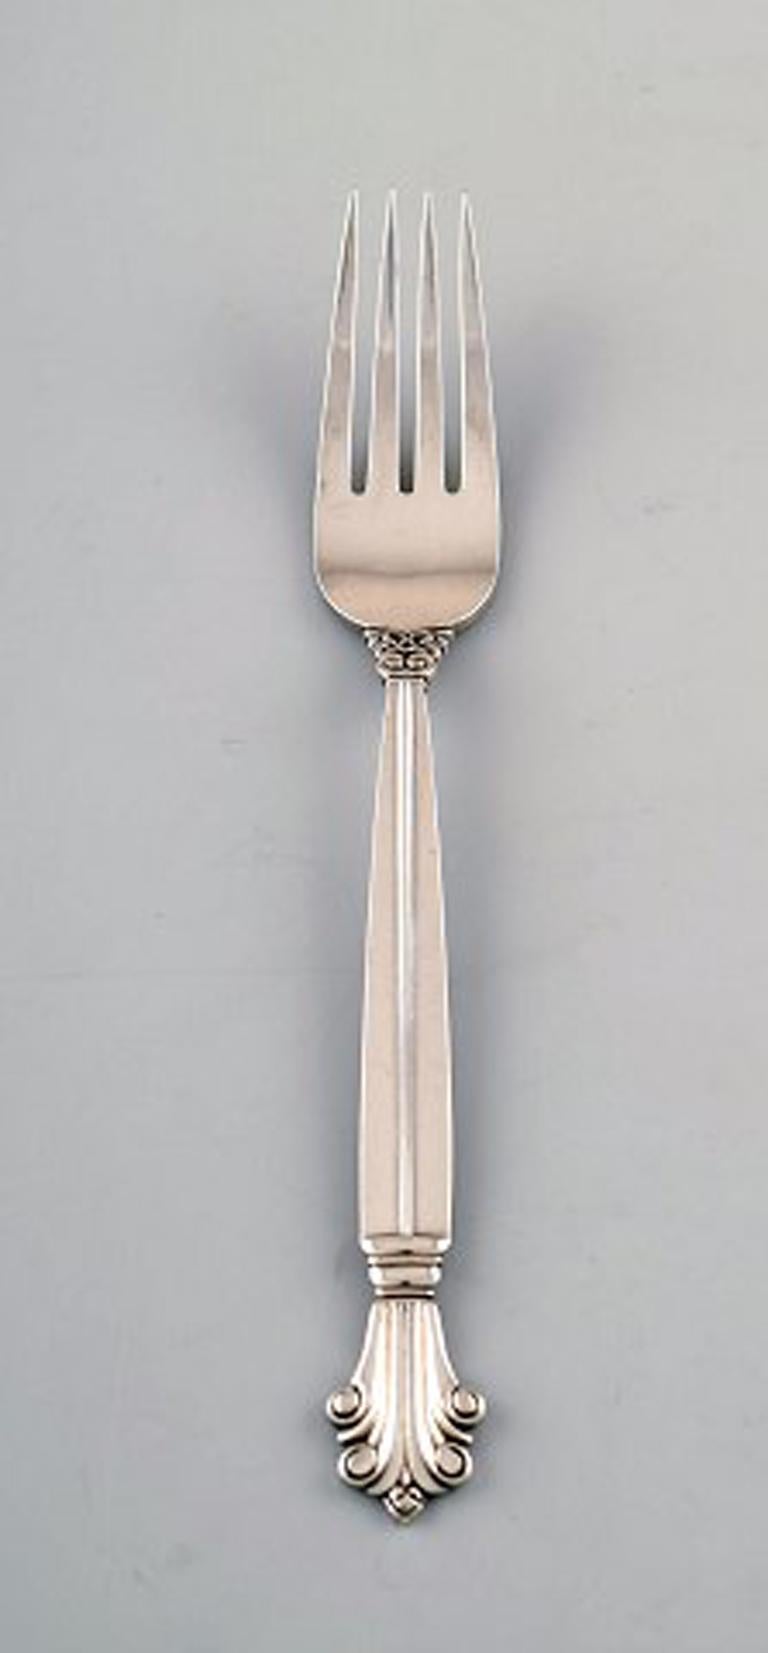 Georg Jensen Acanthus sterling silver set of twelve luncheon forks.
Measures: 18 cm.
In very good condition.
Stamped.